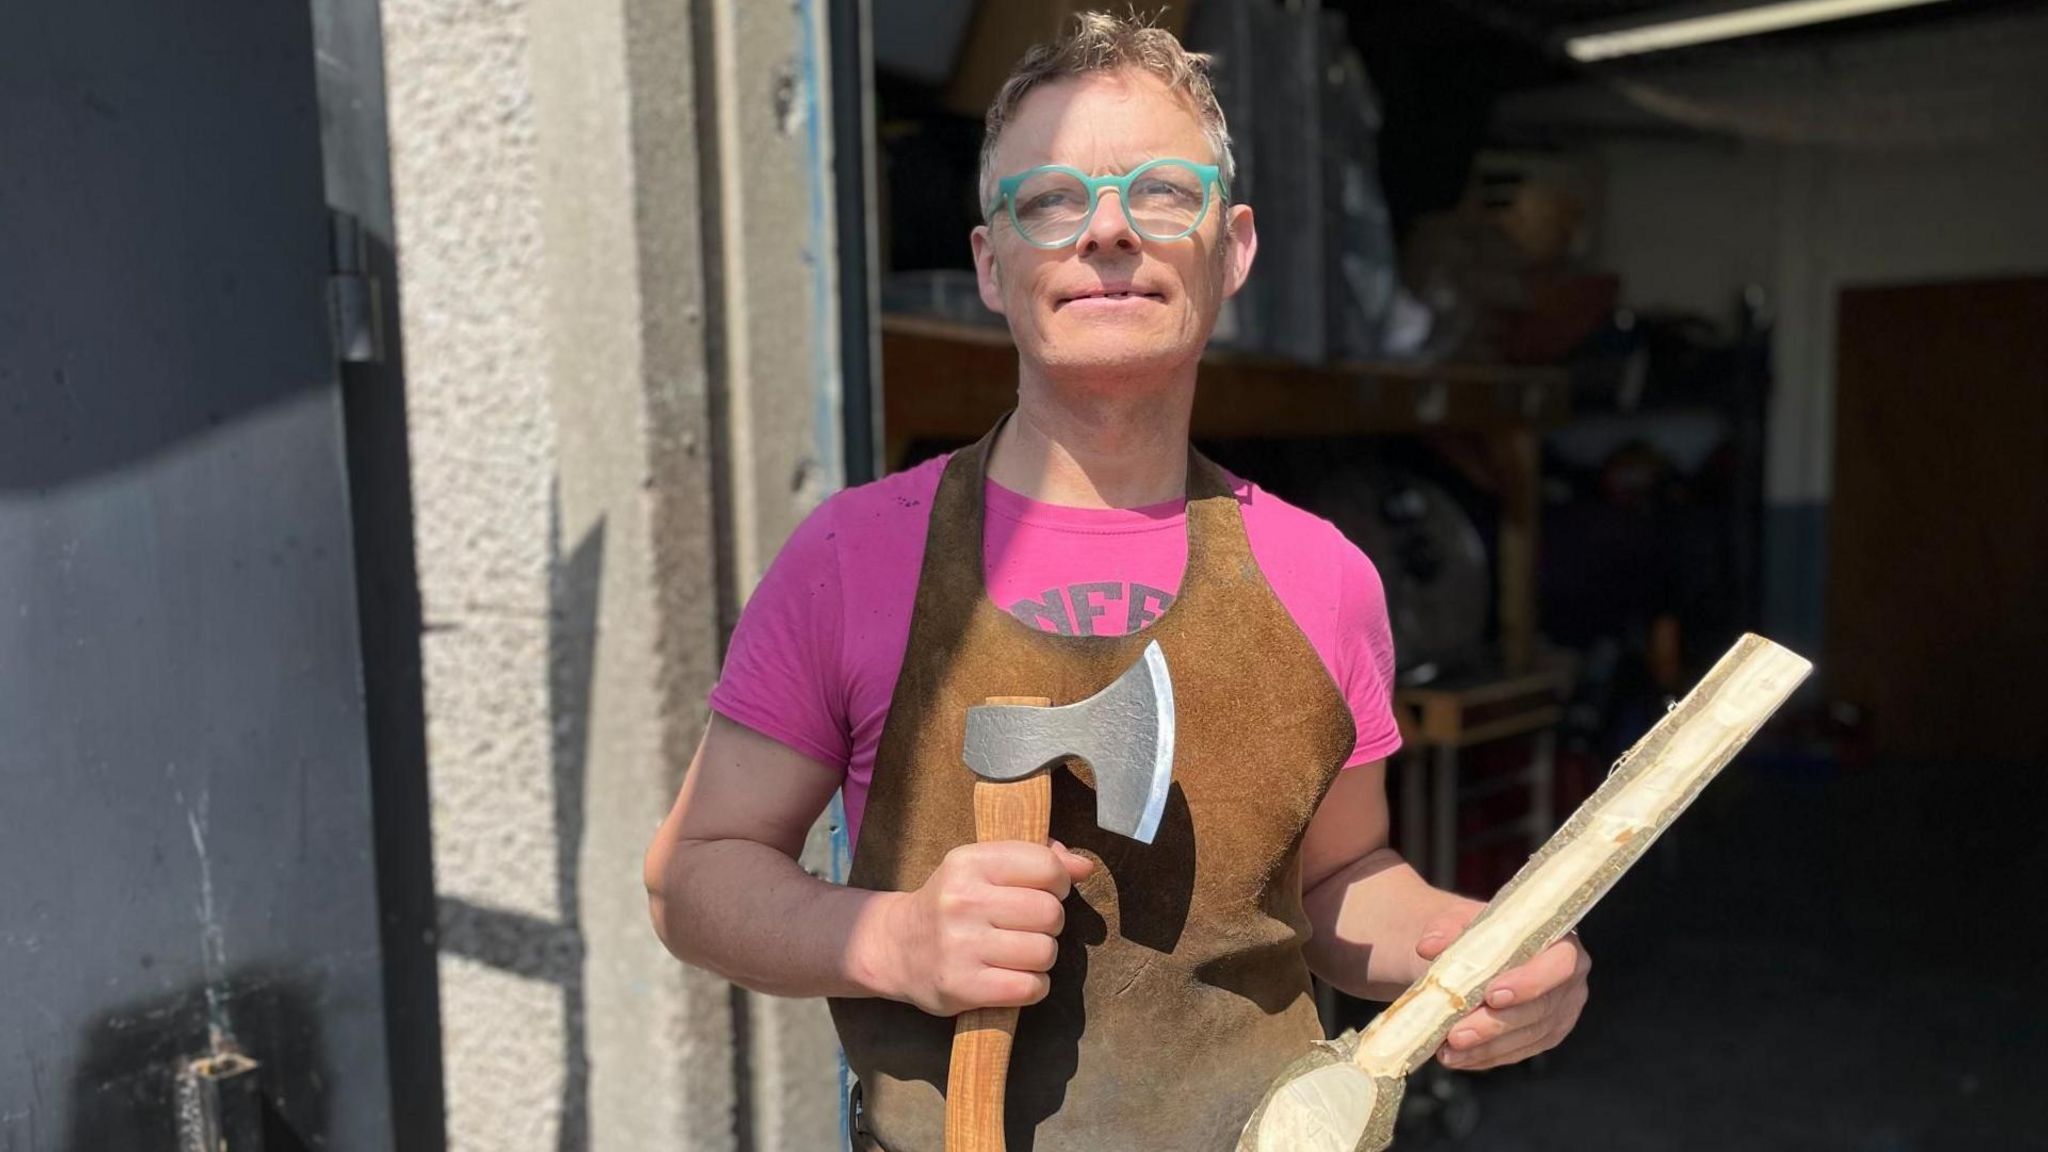 A man with green glasses and brown apron is holding an axe and a large wooden spoon